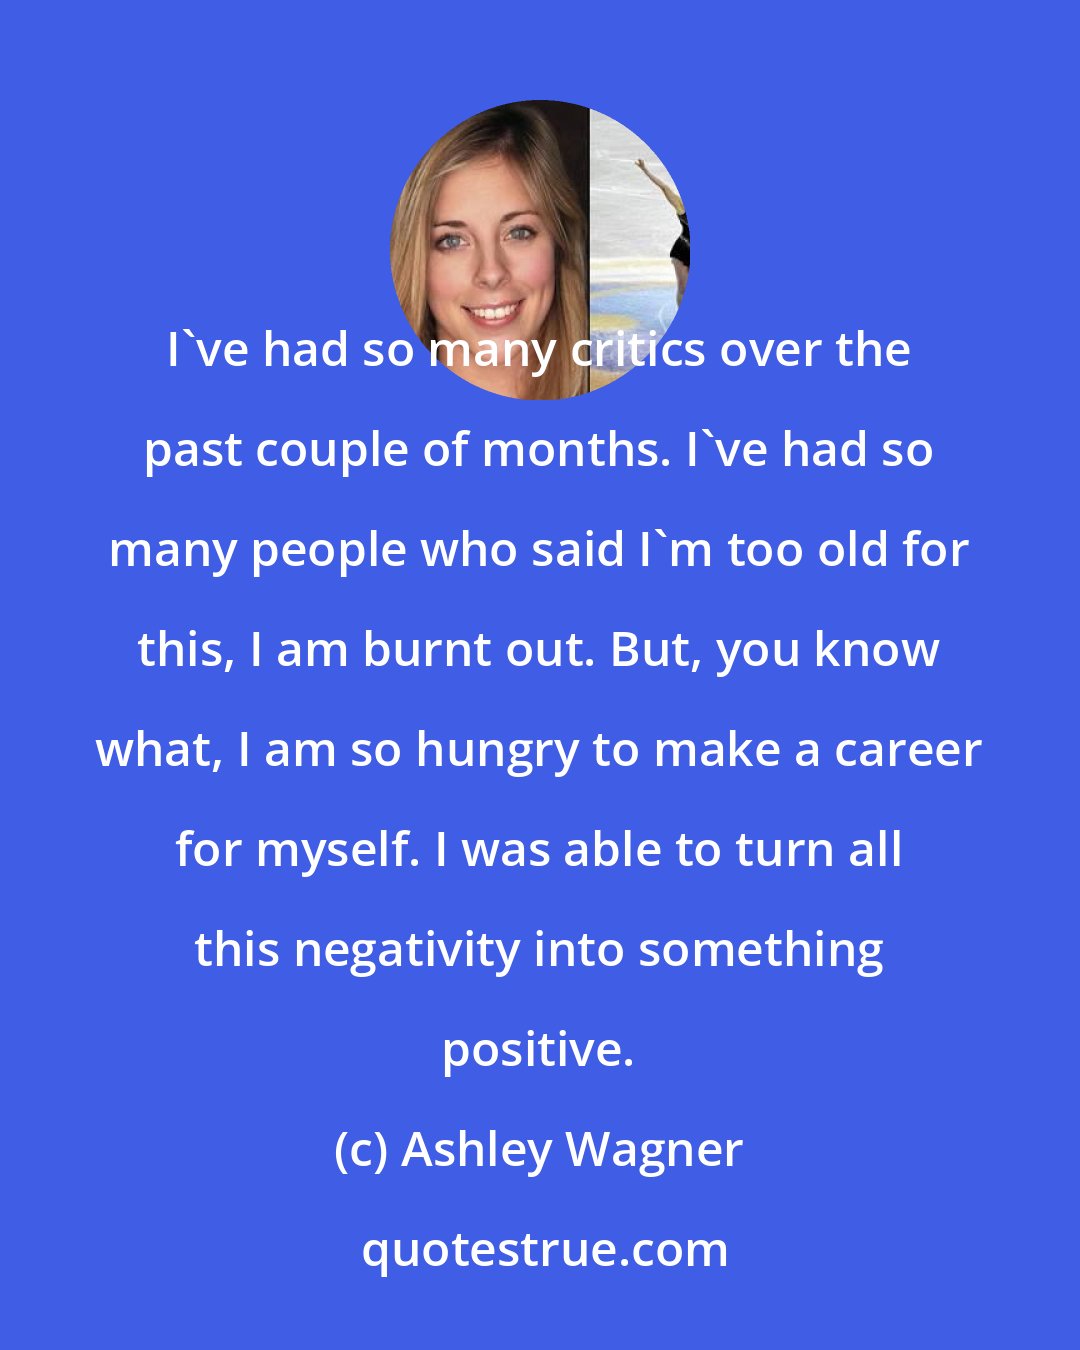 Ashley Wagner: I've had so many critics over the past couple of months. I've had so many people who said I'm too old for this, I am burnt out. But, you know what, I am so hungry to make a career for myself. I was able to turn all this negativity into something positive.